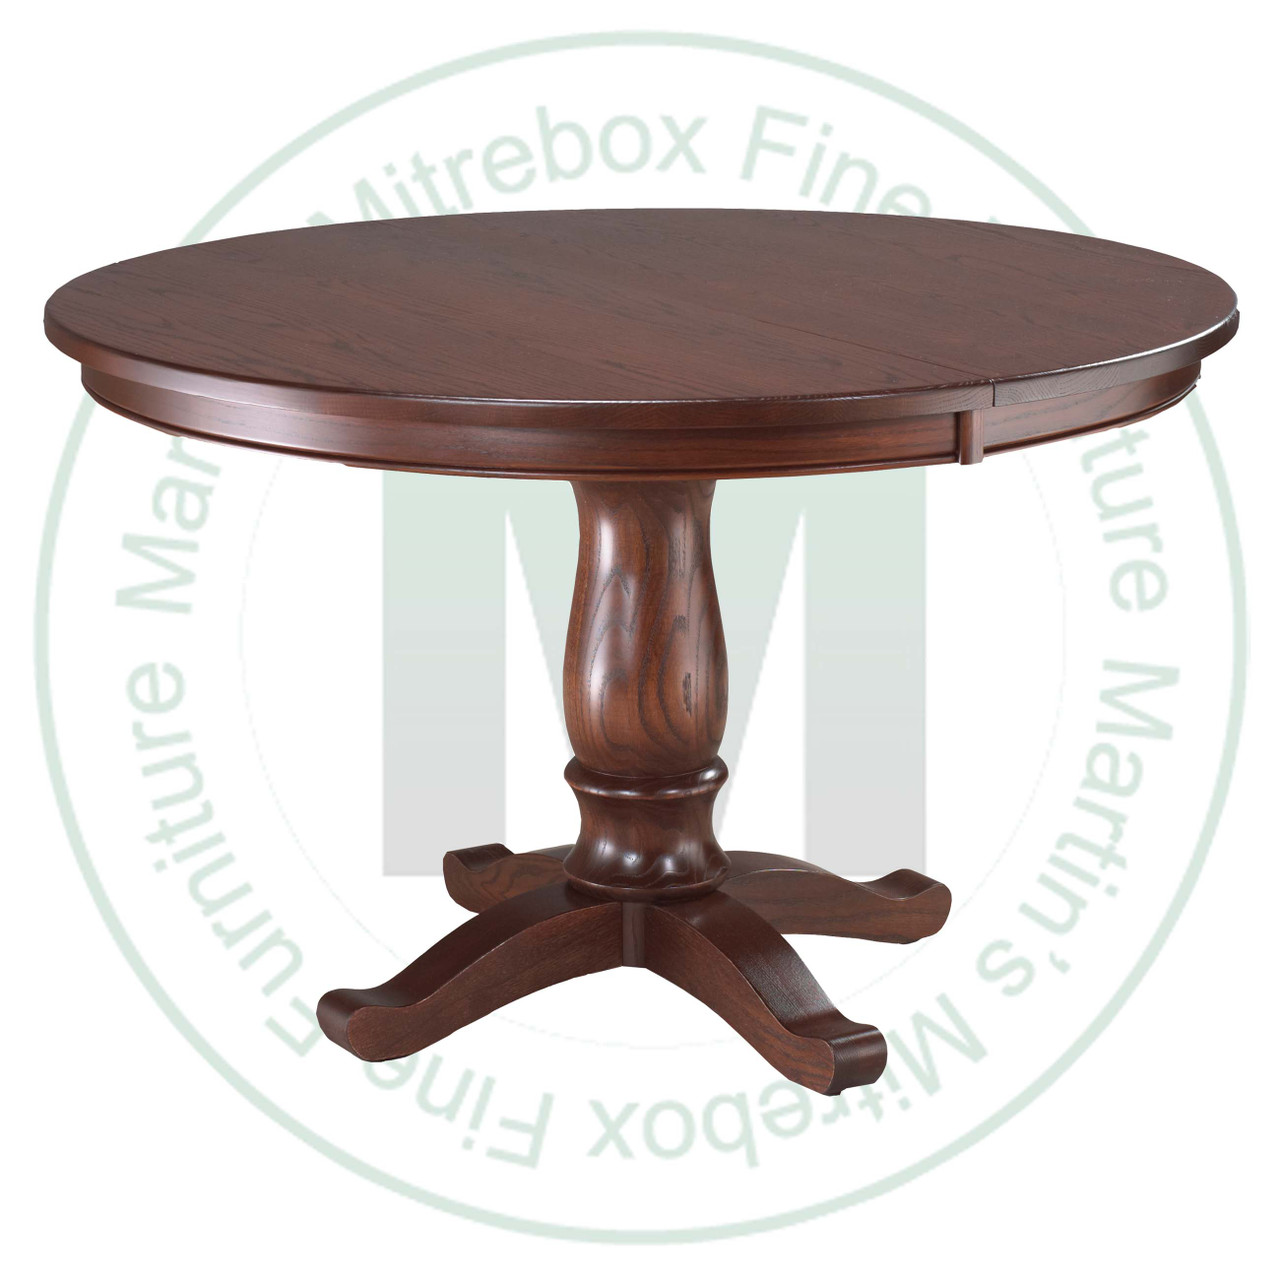 Wormy Maple Kimberly Crest Single Pedestal Table 36''D x 36''W x 30''H With 2 - 12'' Leaves Table. Table Has 1'' Thick Top.